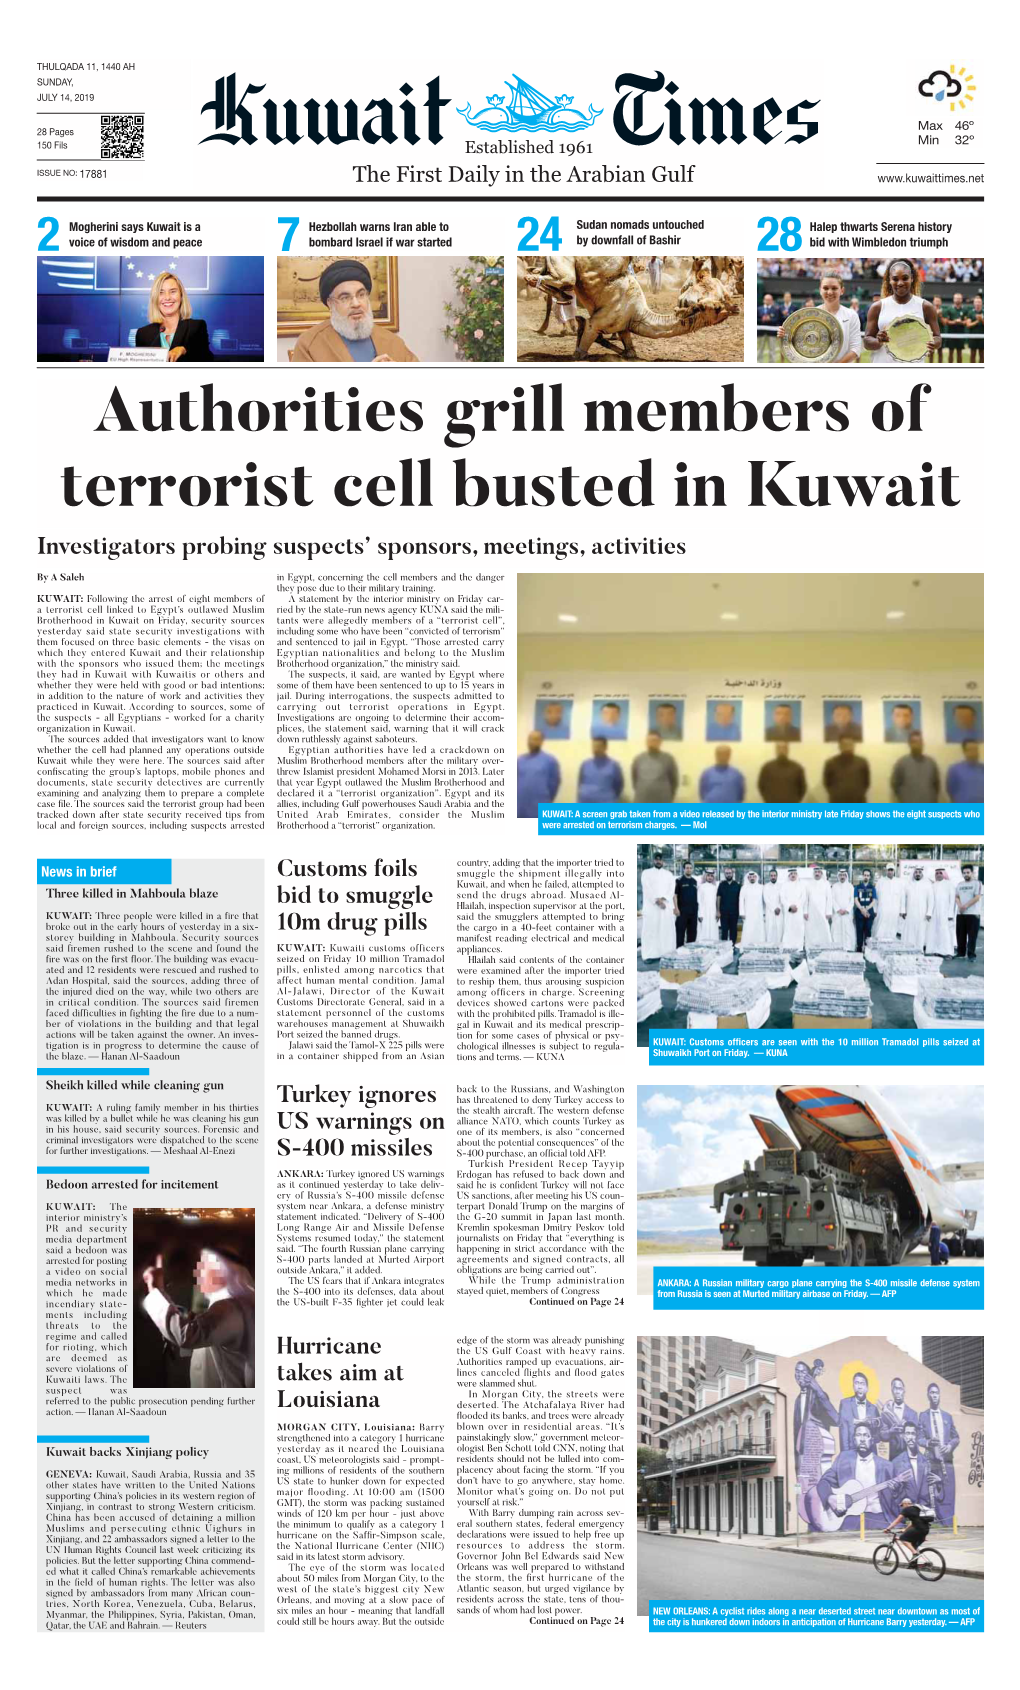 Authorities Grill Members of Terrorist Cell Busted in Kuwait Investigators Probing Suspects’ Sponsors, Meetings, Activities